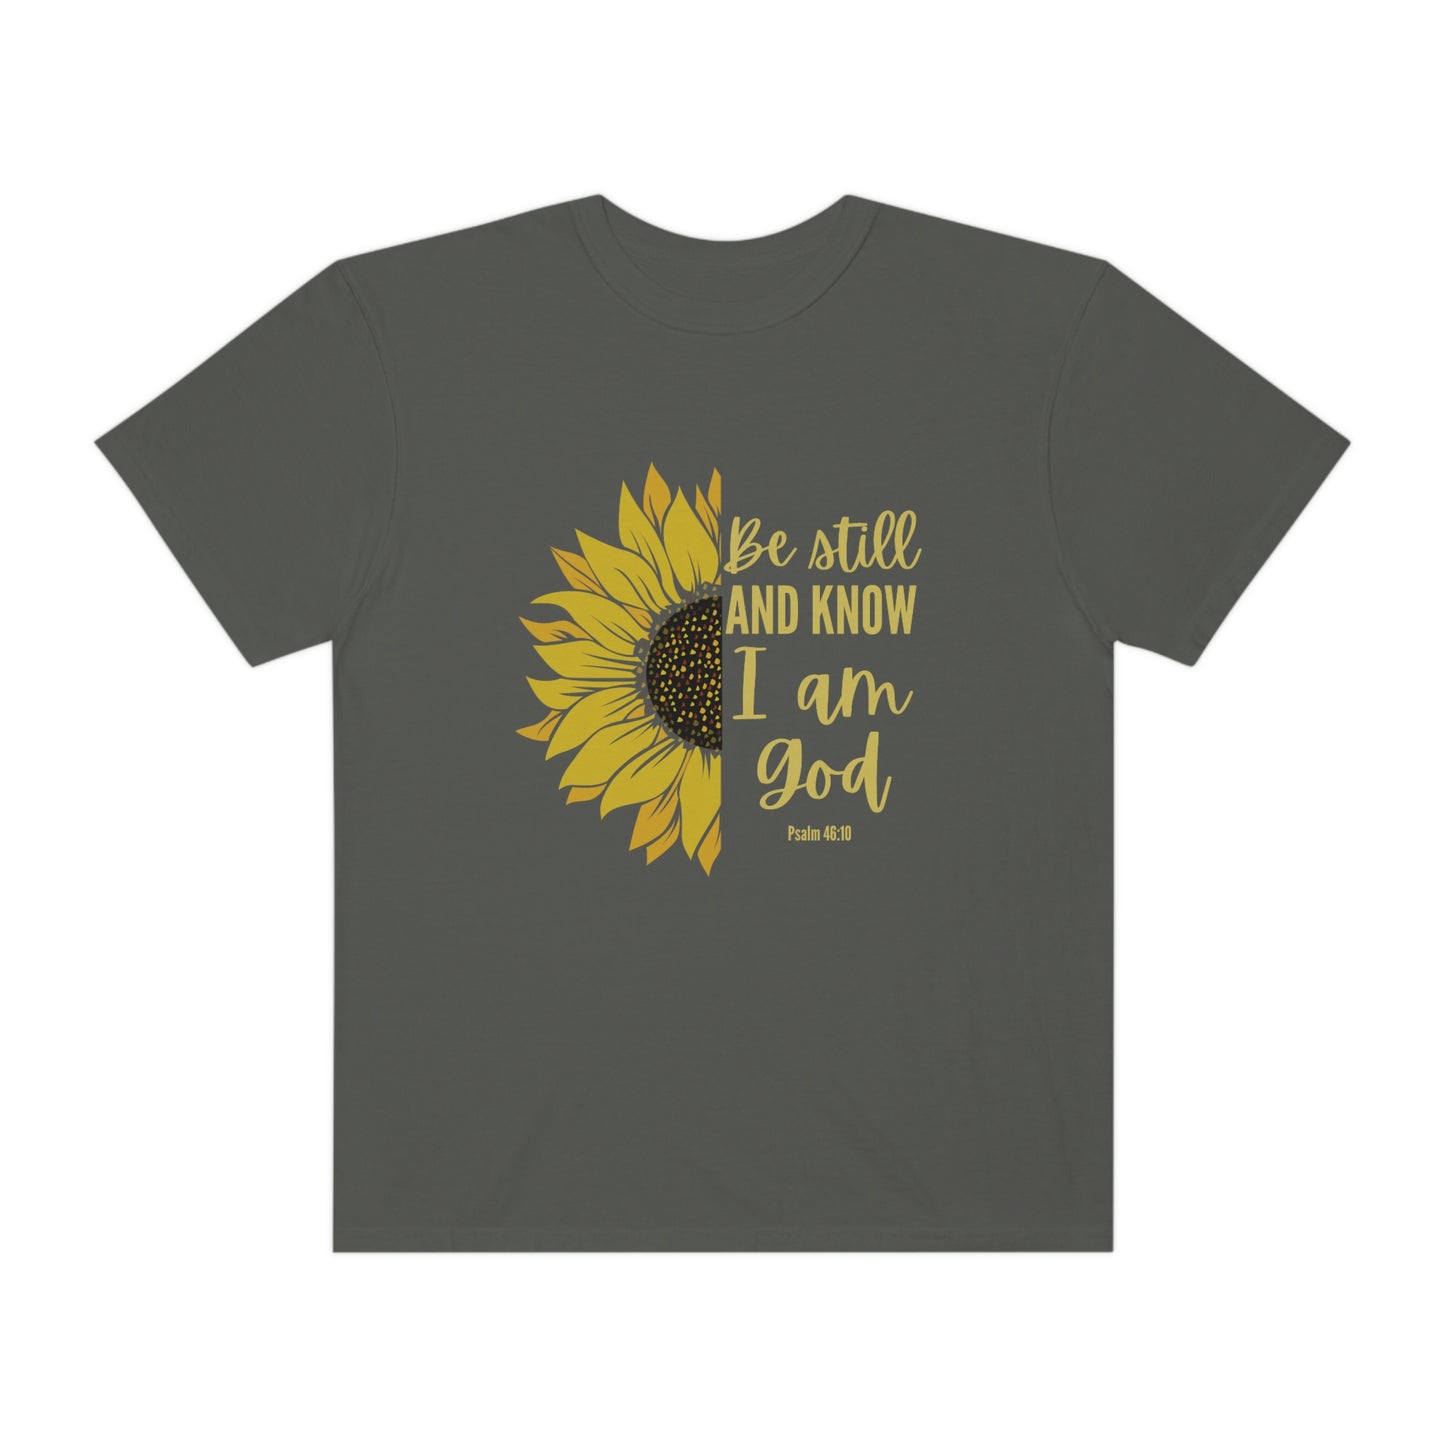 Be Still and Know I am God, Psalm 46:10, Sunflower Comfort Colors Christian T-Shirt